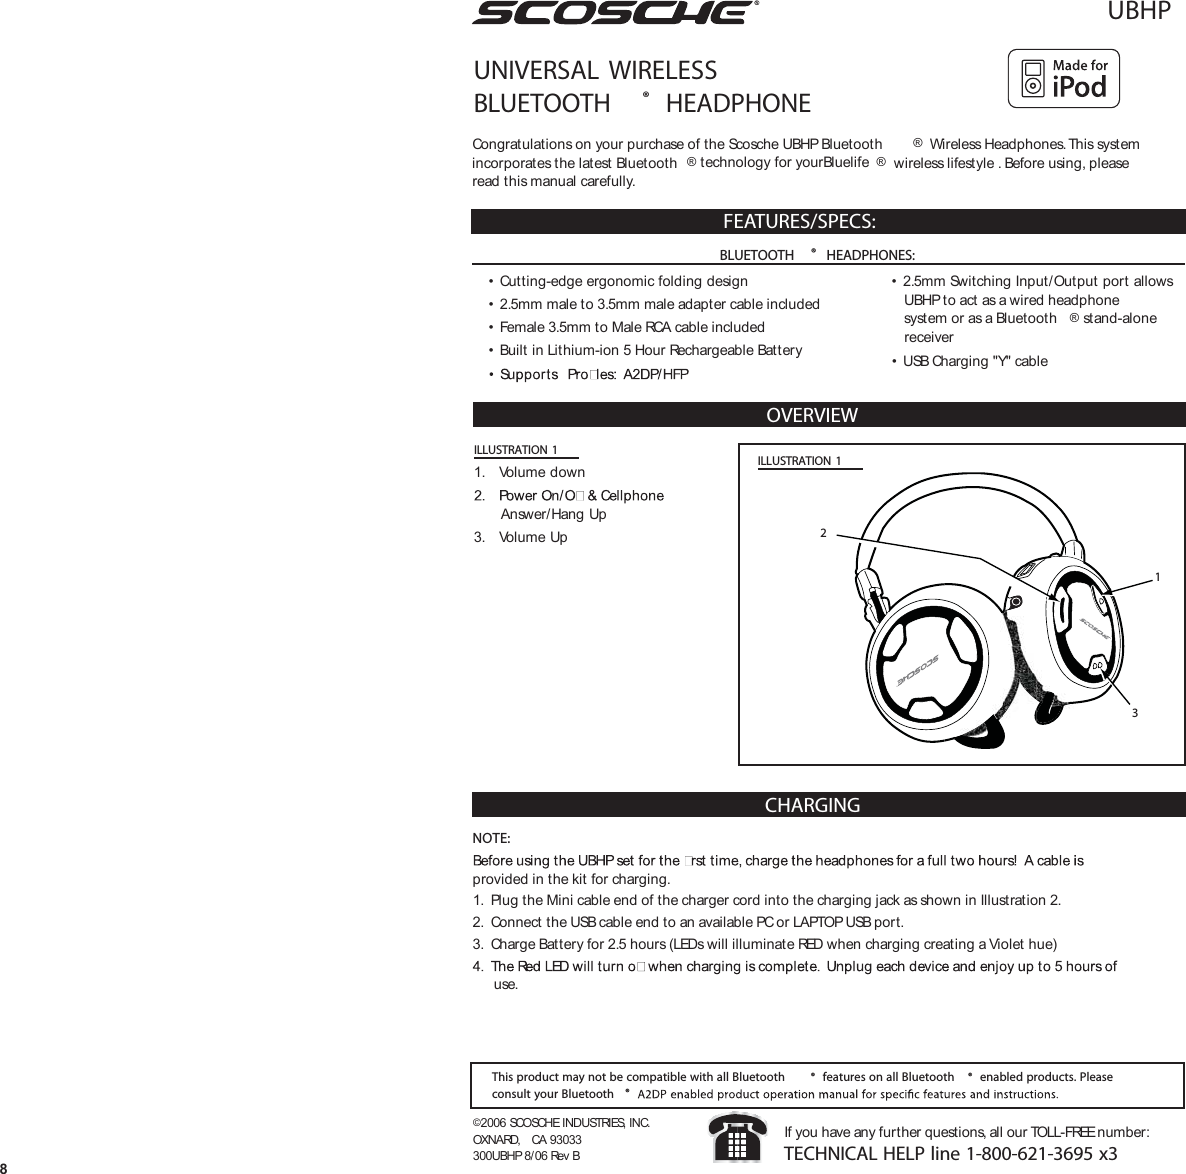 UBHPUNIVERSAL  WIRELESSBLUETOOTH ®  HEADPHONEOVERVIEW©2006 SCOSCHE INDUSTRIES, INC.OXNARD,  CA 93033300UBHP 8/06 Rev BIf you have any further questions, all our TOLL-FREE number:TECHNICAL HELP line 1-800-621-3695 x3Congratulations on your purchase of the Scosche UBHP Bluetooth ® Wireless Headphones. This systemincorporates the latest Bluetooth ® technology for yourBluelife ®  wireless lifestyle . Before using, pleaseread this manual carefully.FEATURES/SPECS:• Cutting-edge ergonomic folding design• 2.5mm male to 3.5mm male adapter cable included• Female 3.5mm to Male RCA cable included• Built in Lithium-ion 5 Hour Rechargeable Battery• 2.5mm Switching Input/Output port allowsUBHP to act as a wired headphonesystem or as a Bluetooth ® stand-alonereceiver• USB Charging &quot;Y&quot; cableThis product may not be compatible with all Bluetooth ® features on all Bluetooth ® enabled products. Pleaseconsult your Bluetooth ®ILLUSTRATION 1ILLUSTRATION 11. Volume downAnswer/Hang Up3. Volume Up 2138BLUETOOTH ®  HEADPHONES:CHARGINGNOTE:provided in the kit for charging.1. Plug the Mini cable end of the charger cord into the charging jack as shown in Illustration 2.2. Connect the USB cable end to an available PC or LAPTOP USB port.3. Charge Battery for 2.5 hours (LEDs will illuminate RED when charging creating a Violet hue)use.